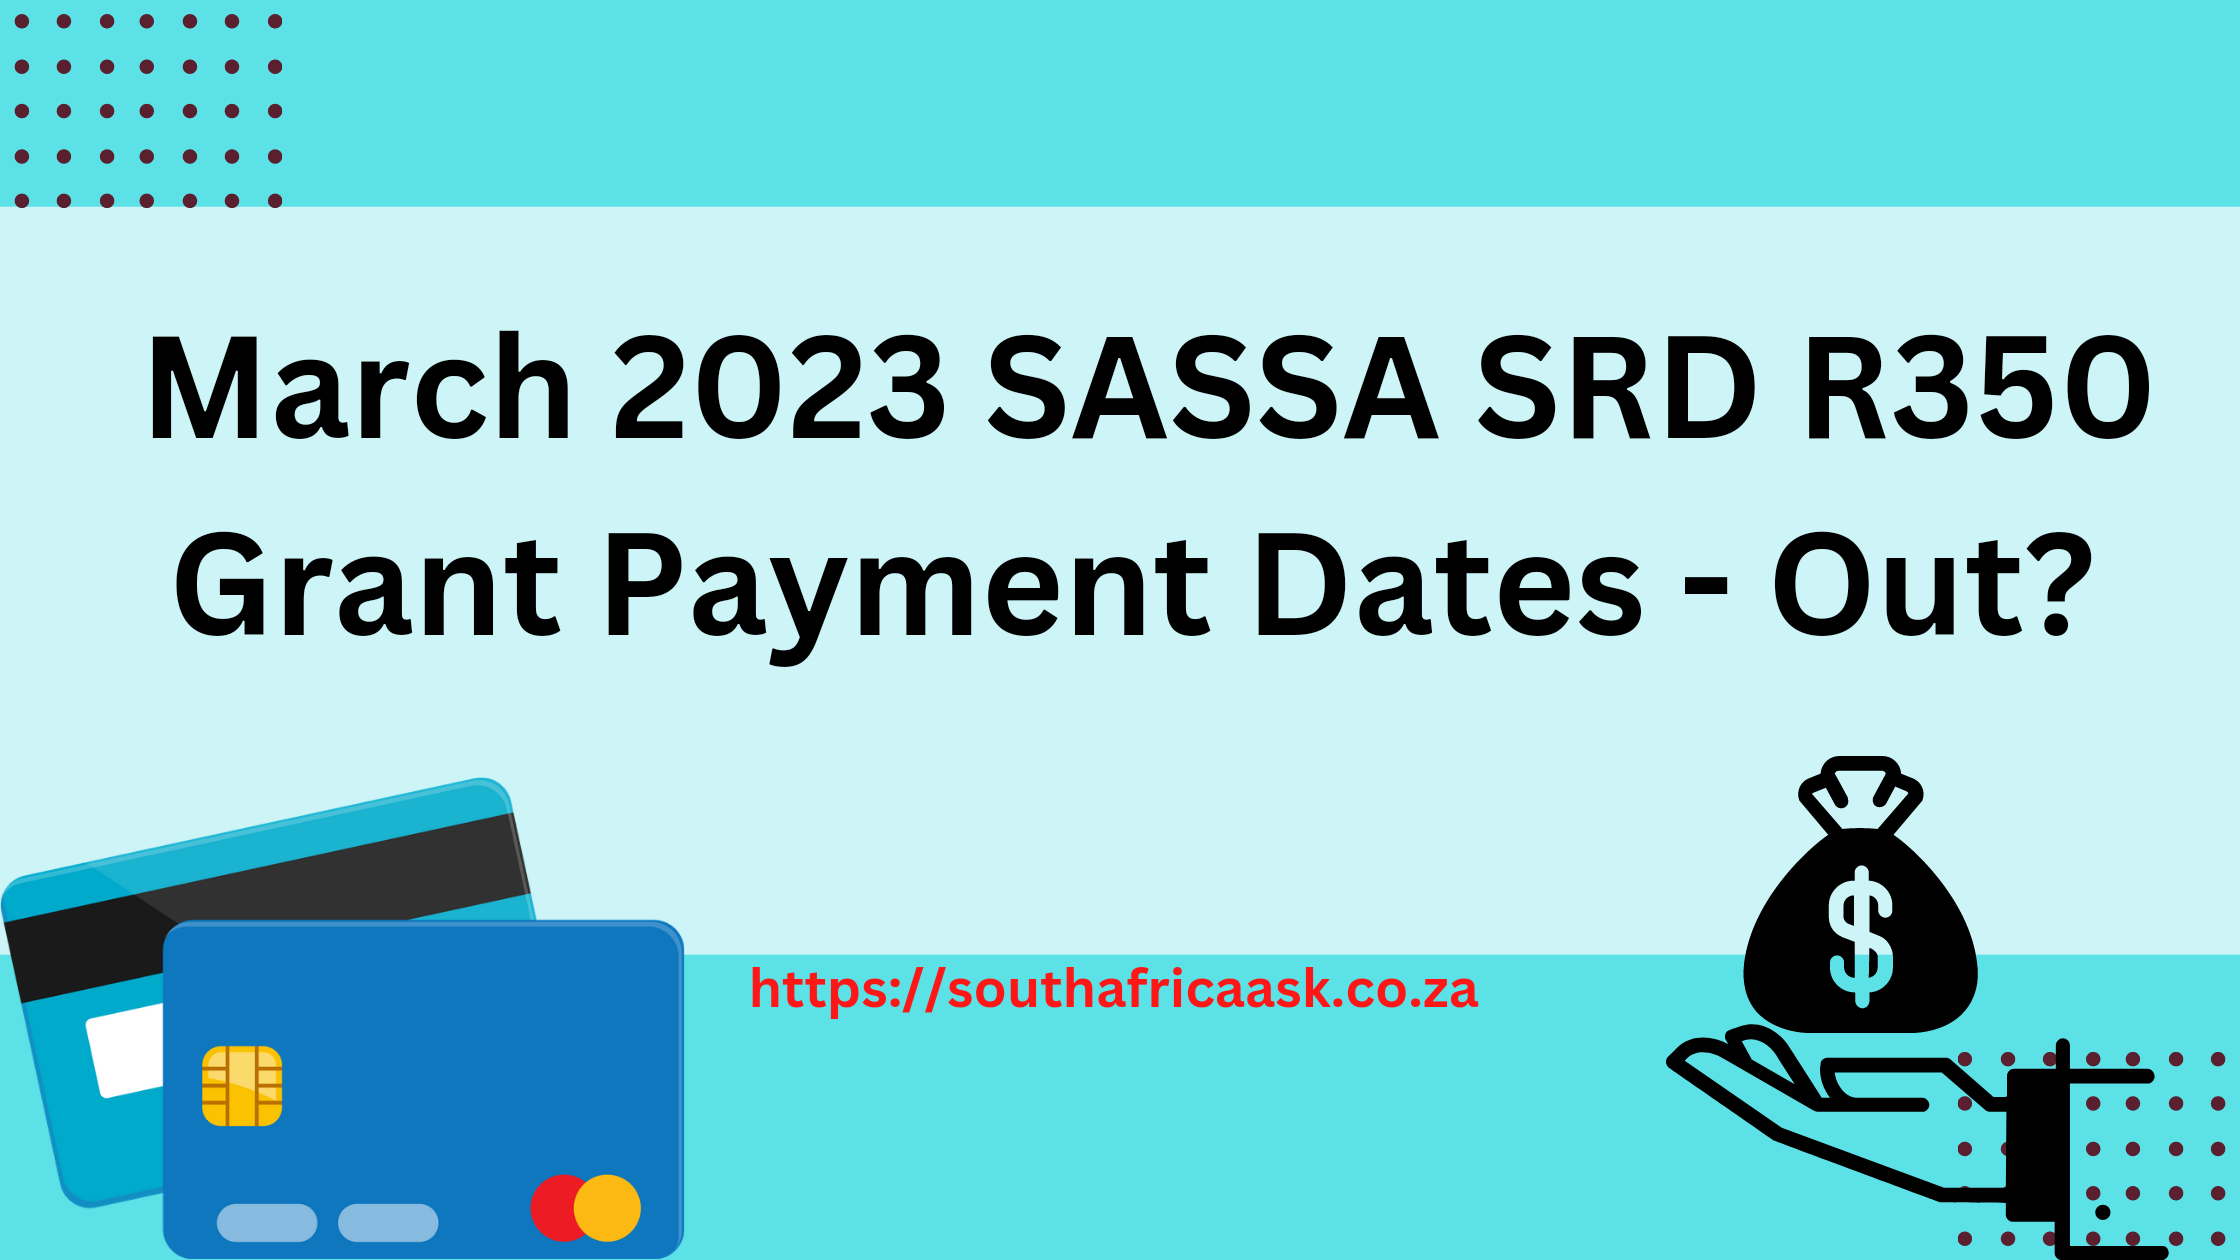 March 2023 SASSA SRD R350 Grant Payment Dates - Out?